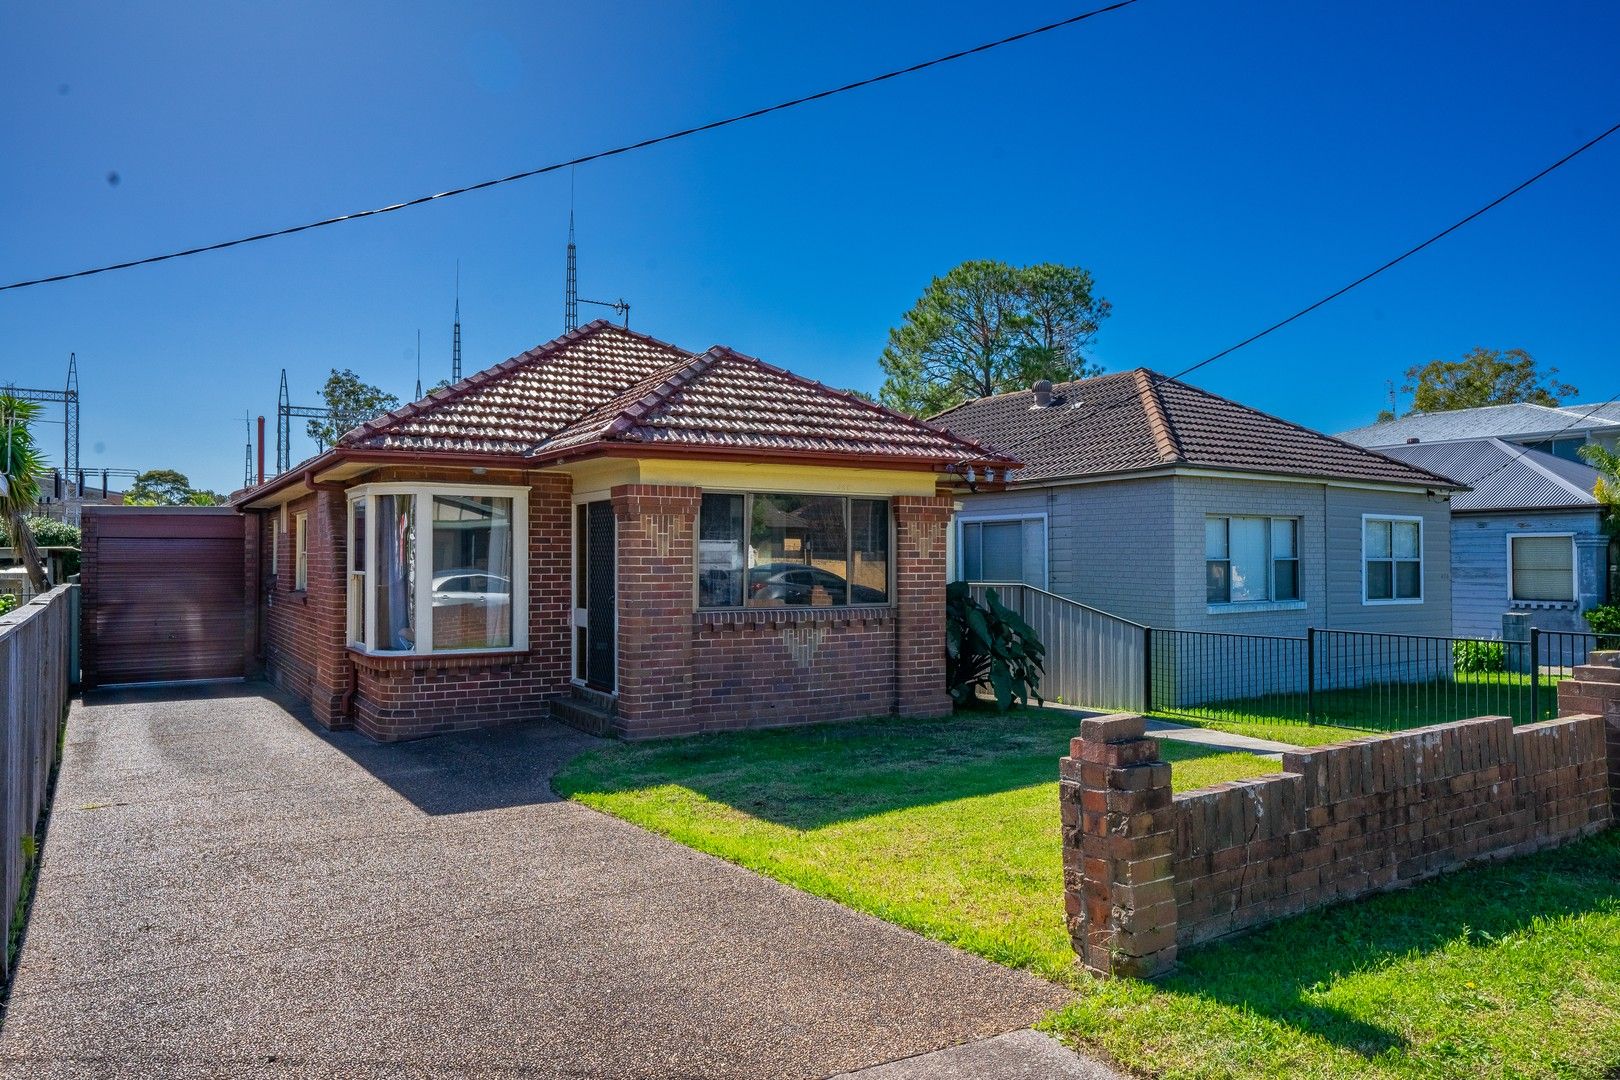 3 bedrooms House in 438 Glebe Road HAMILTON SOUTH NSW, 2303